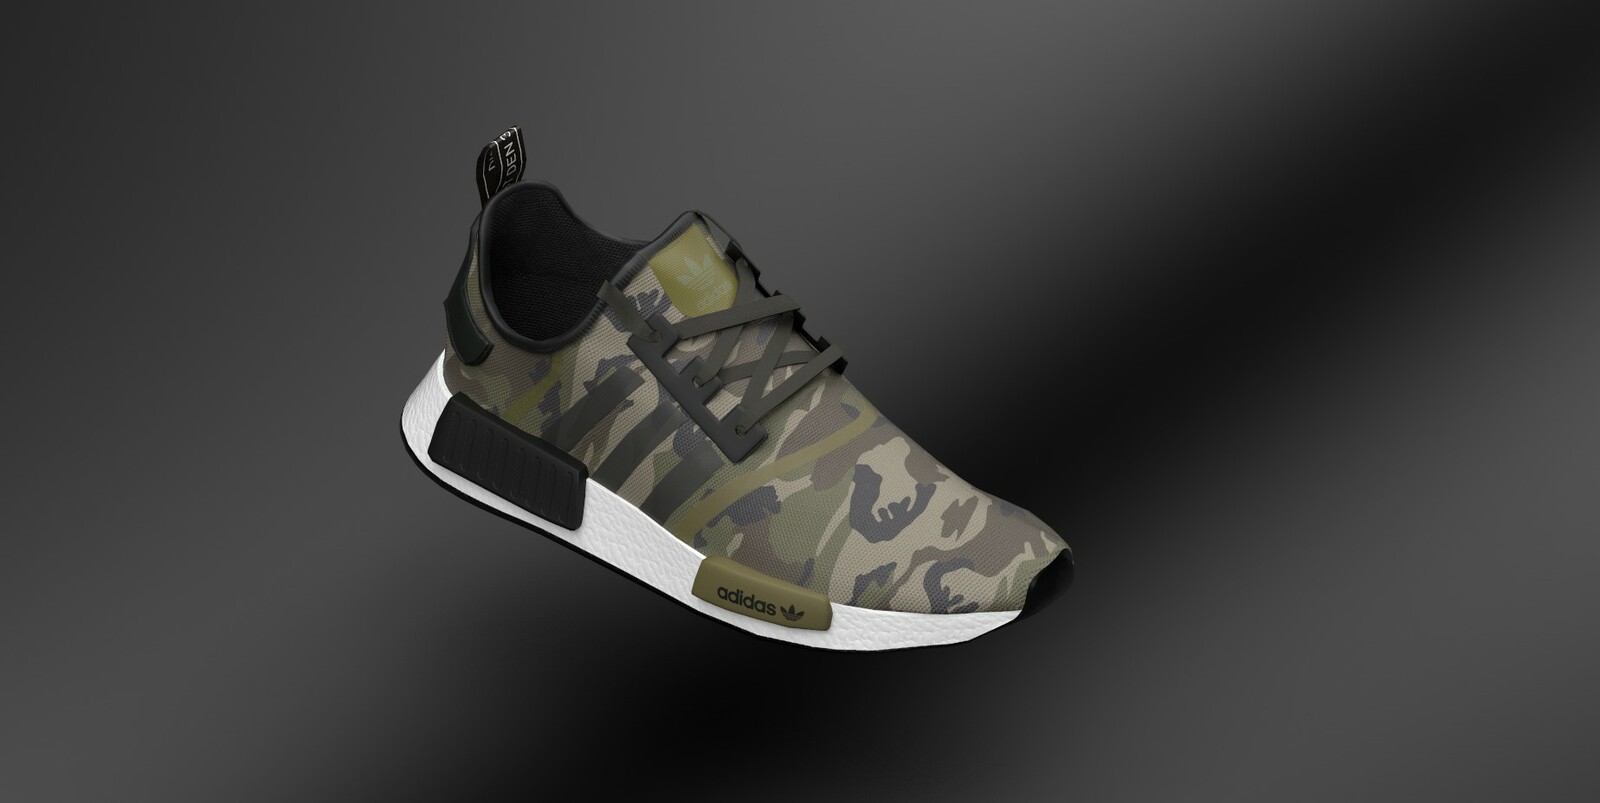 Adidas Shoe, low poly model, for Champ AR project.